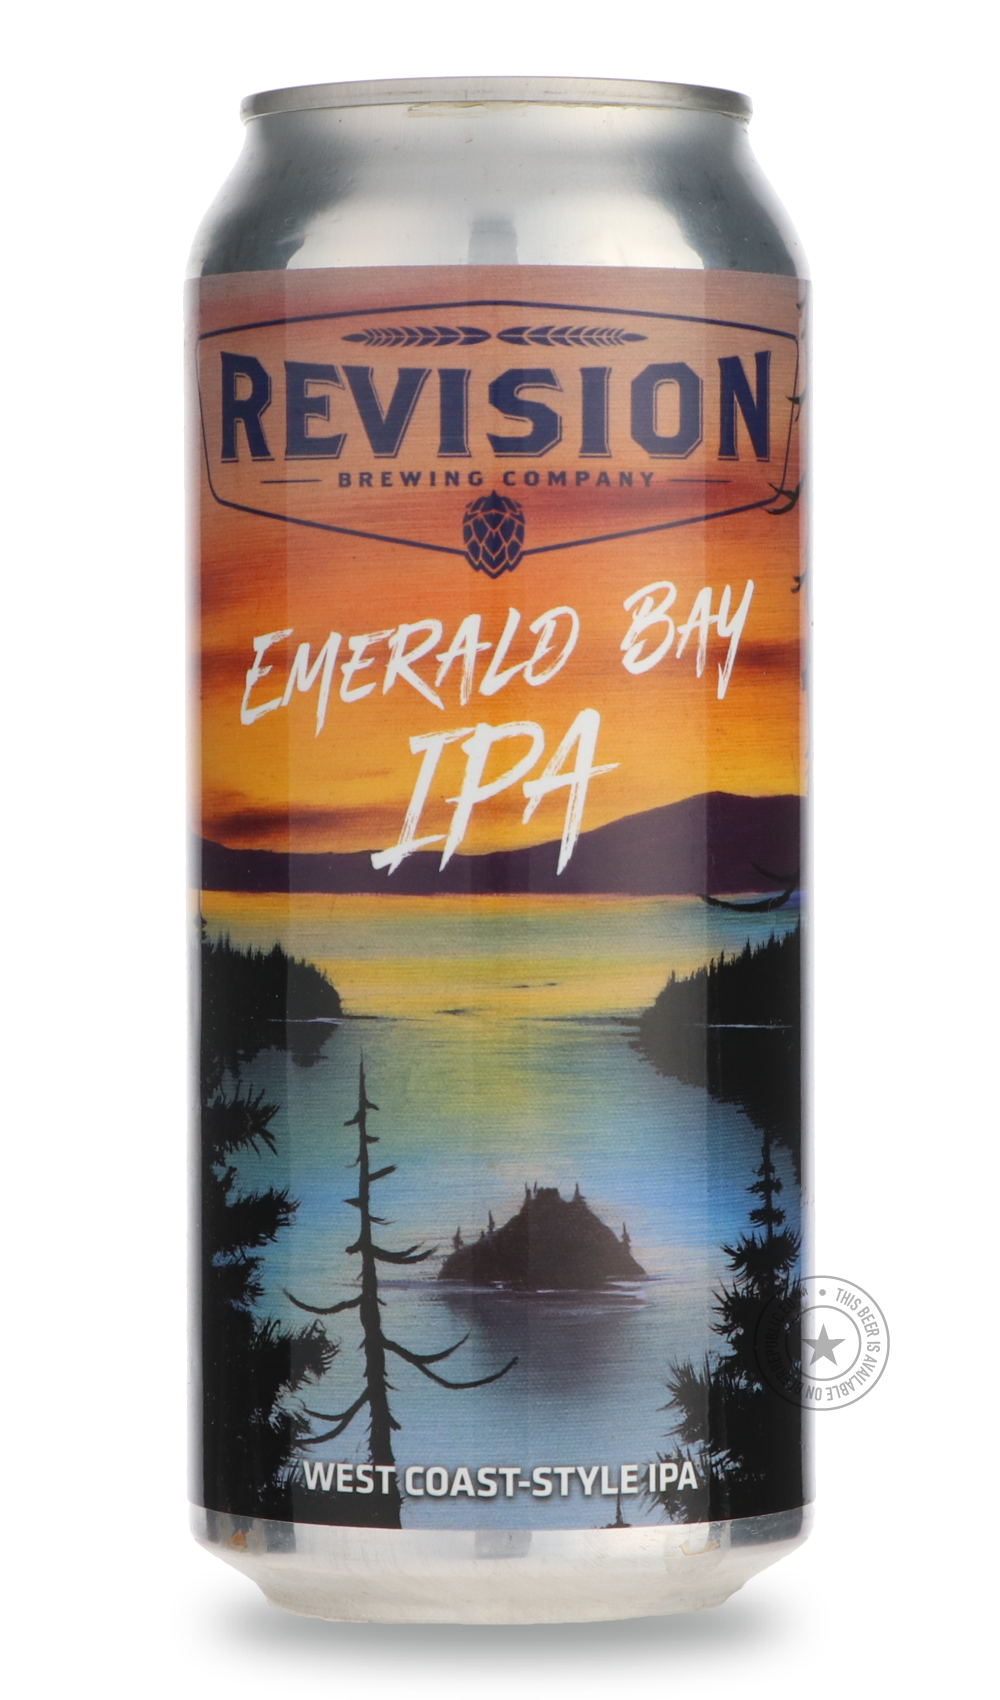 -Revision- Emerald Bay-IPA- Only @ Beer Republic - The best online beer store for American & Canadian craft beer - Buy beer online from the USA and Canada - Bier online kopen - Amerikaans bier kopen - Craft beer store - Craft beer kopen - Amerikanisch bier kaufen - Bier online kaufen - Acheter biere online - IPA - Stout - Porter - New England IPA - Hazy IPA - Imperial Stout - Barrel Aged - Barrel Aged Imperial Stout - Brown - Dark beer - Blond - Blonde - Pilsner - Lager - Wheat - Weizen - Amber - Barley Win